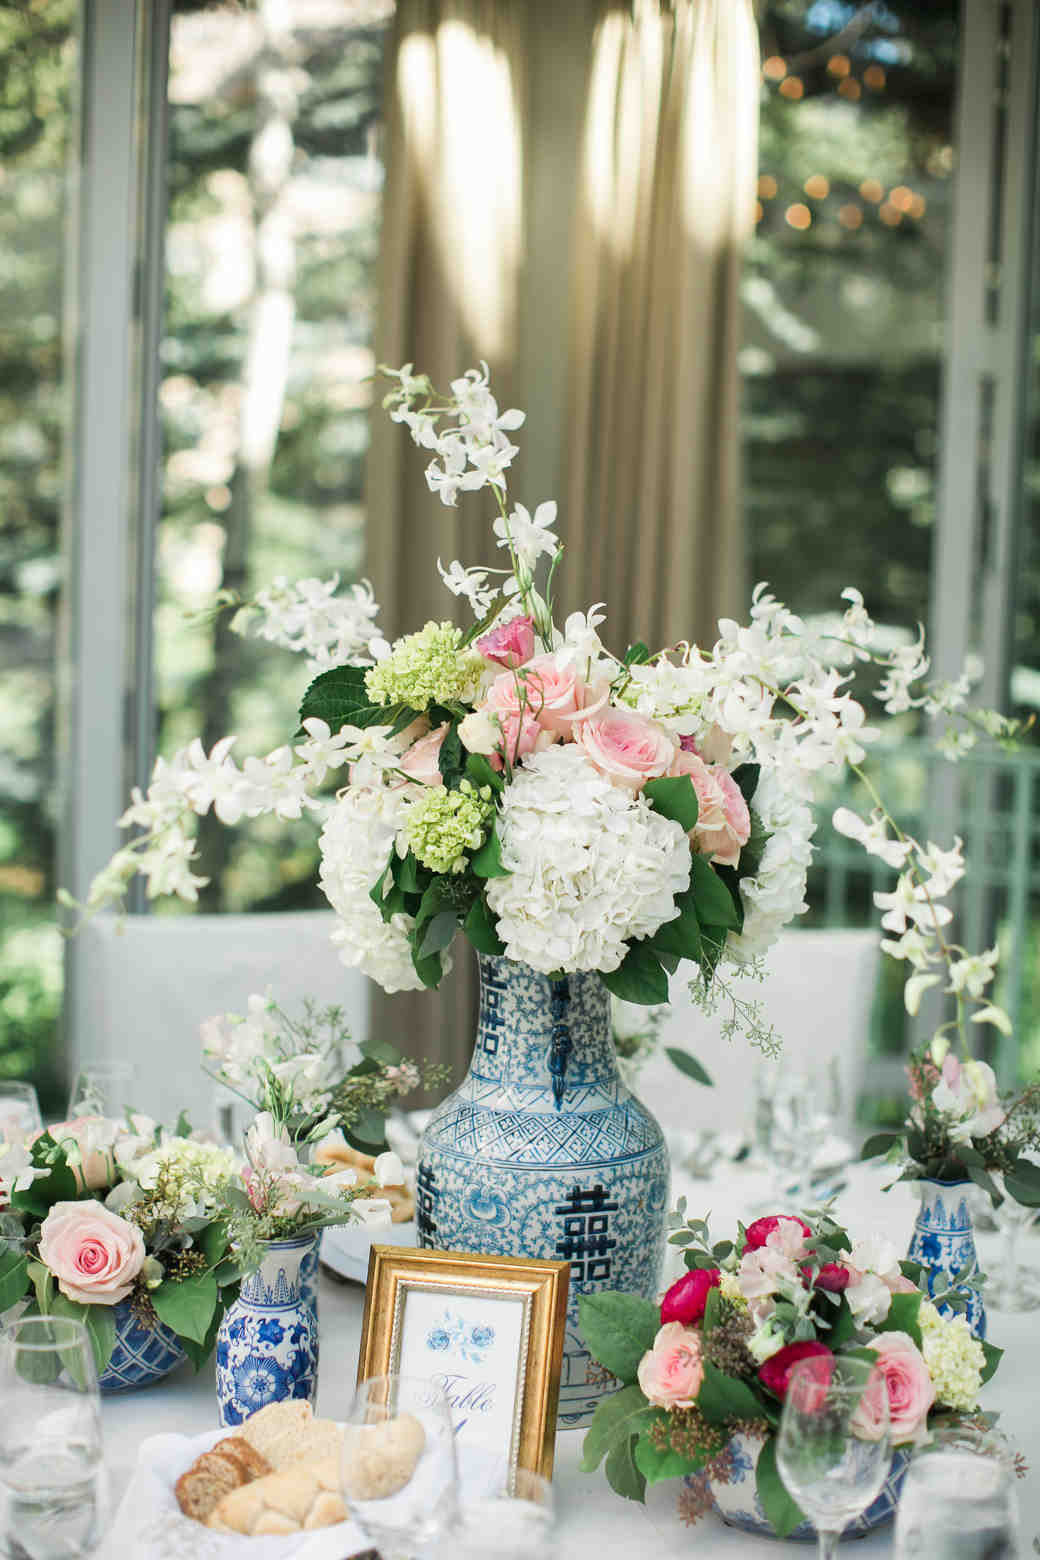 Wedding Shower Ideas And Themes
 37 Bridal Shower Themes That Are Truly e of a Kind